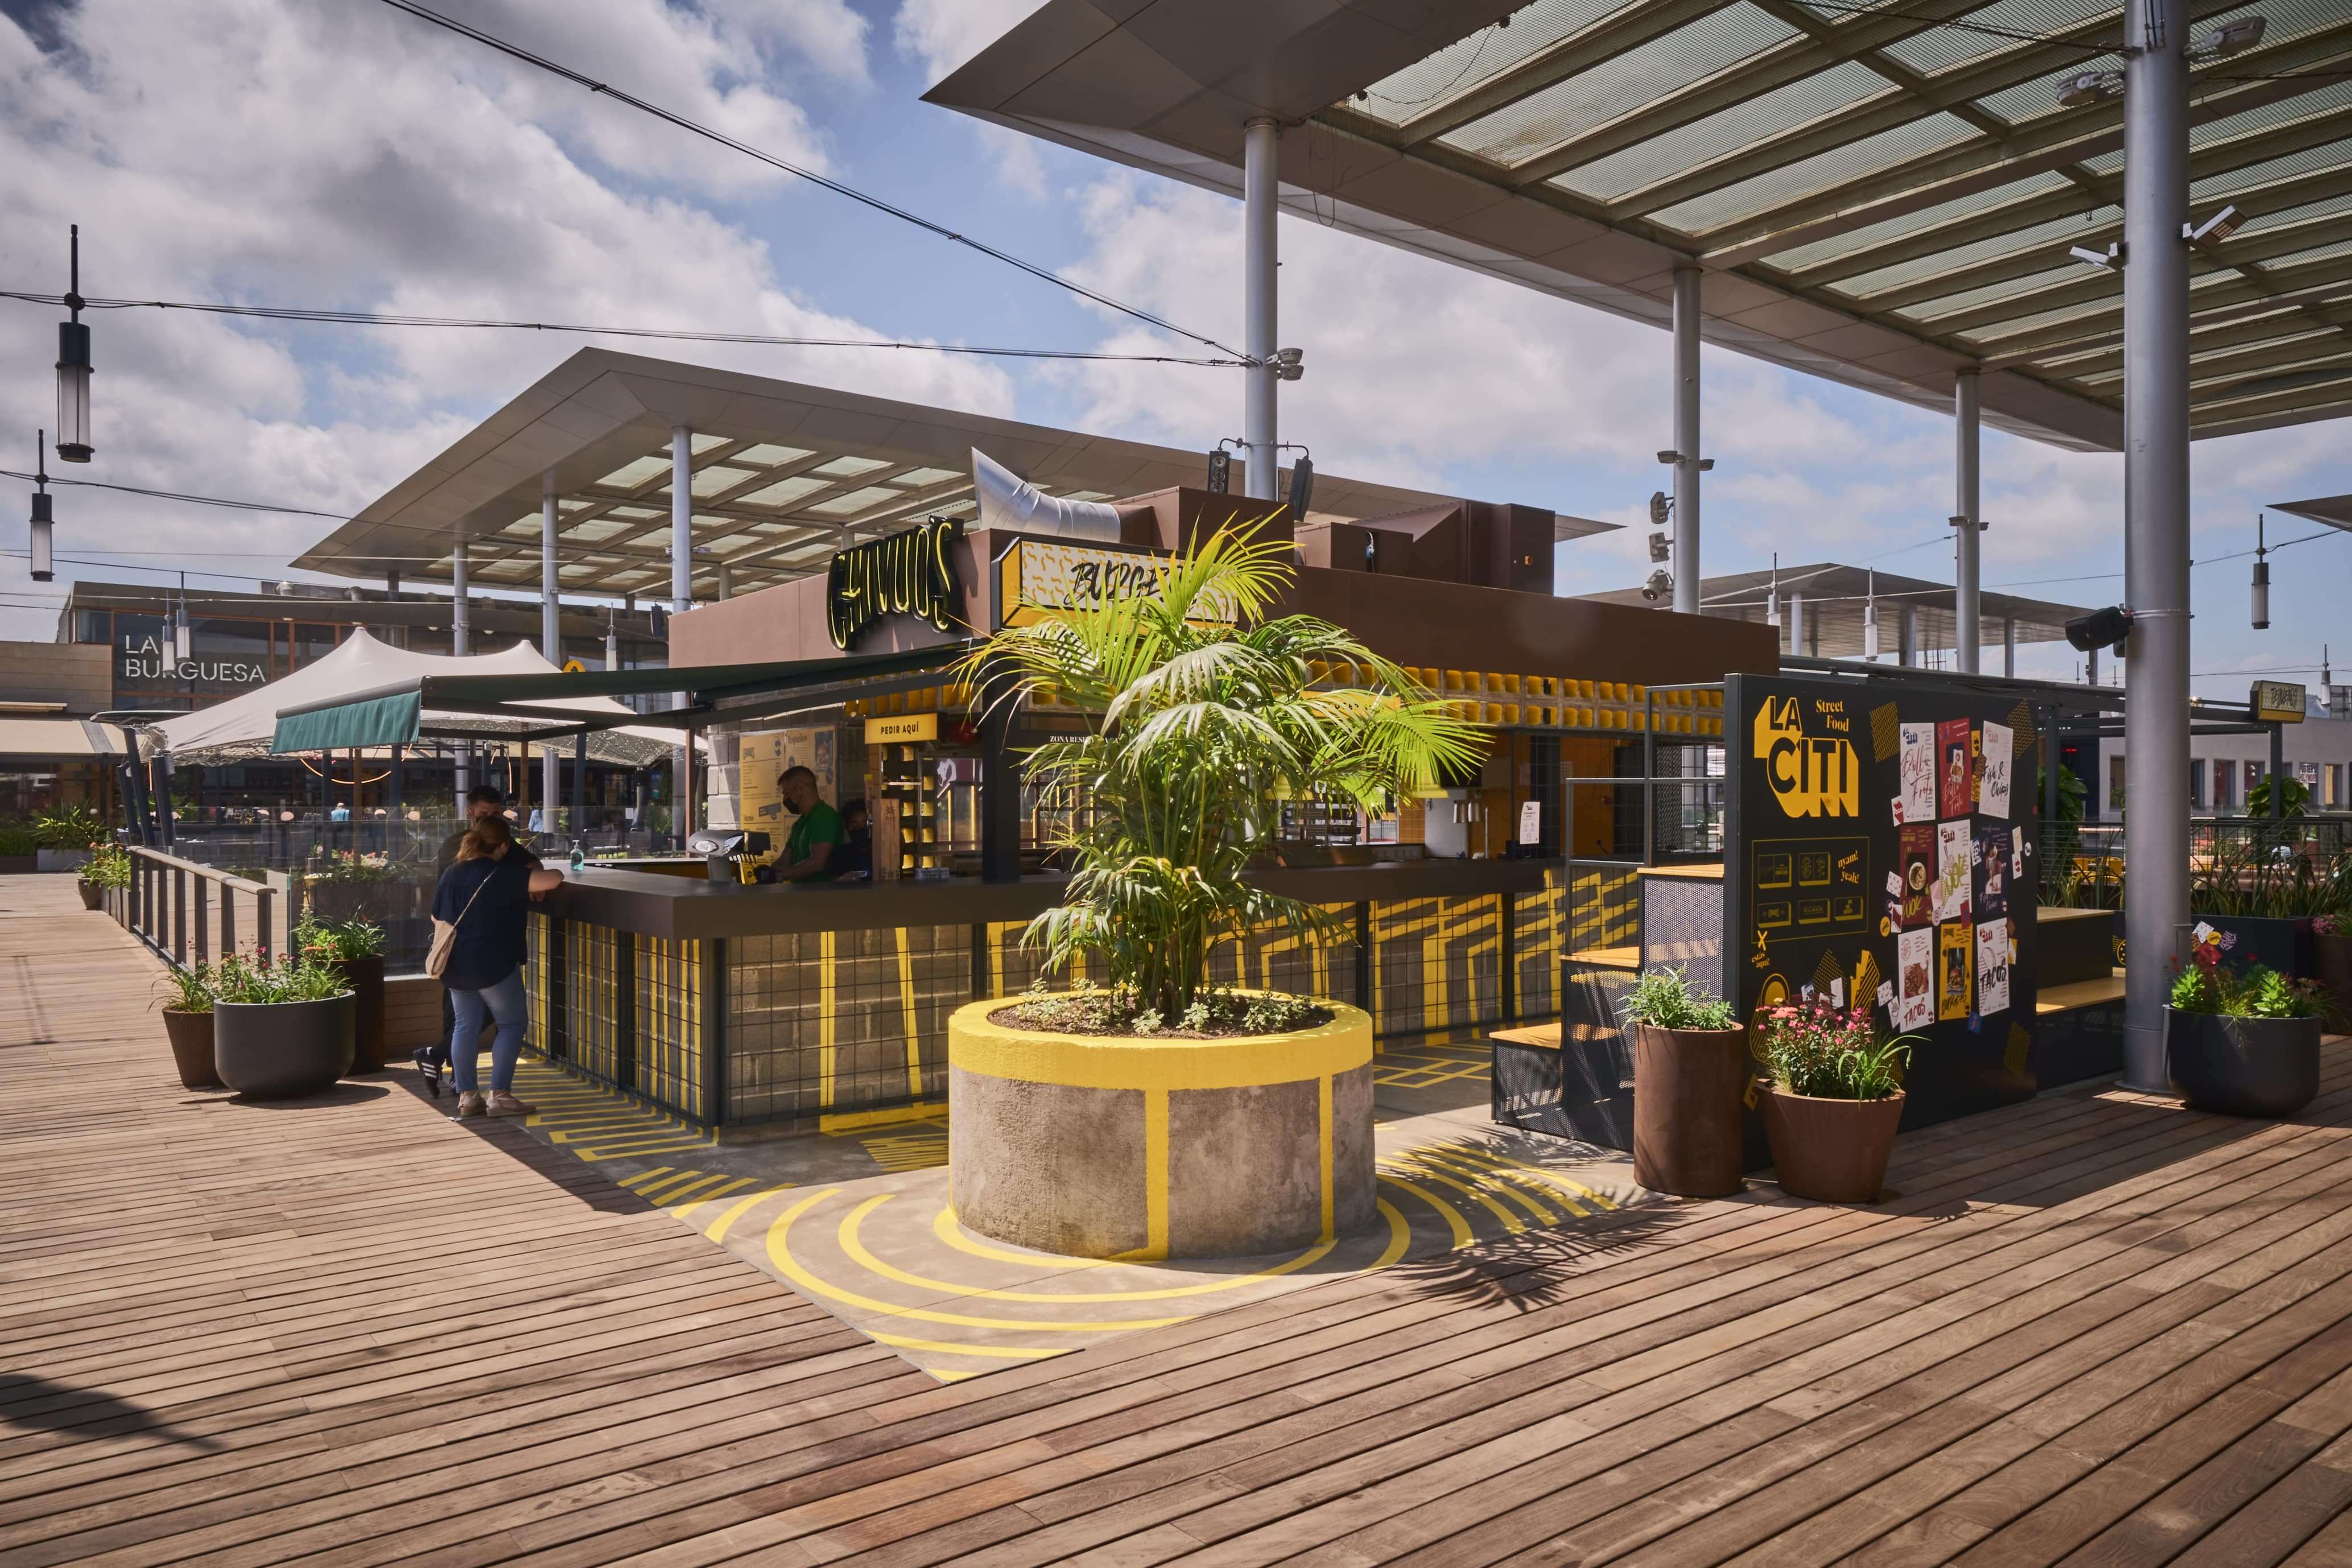 New food and leisure venues at Westfield La Maquinista